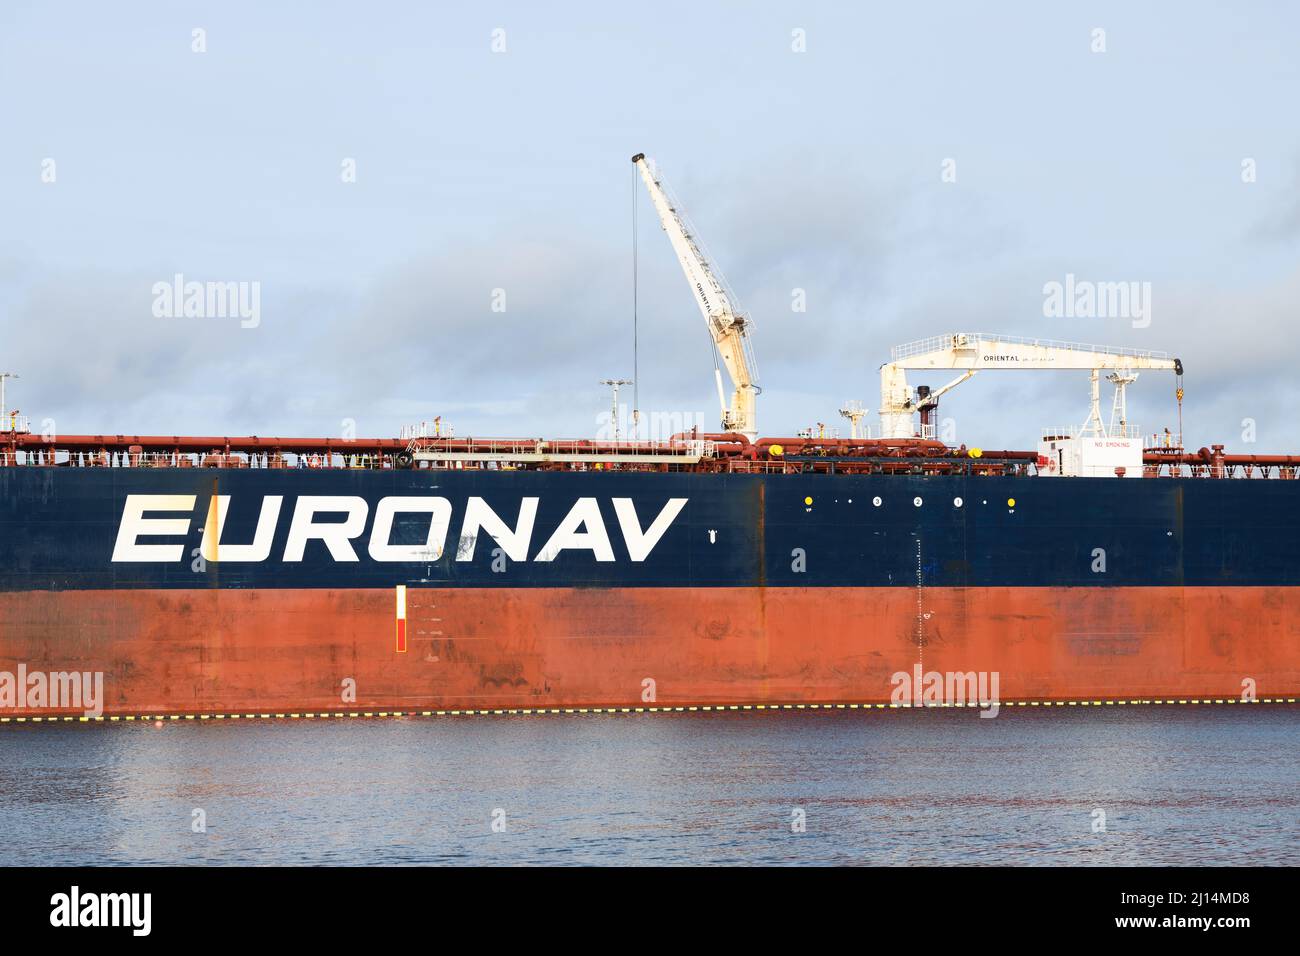 Seattle - March 20, 2022;  Name and detail of Euronav Suezmax crude oil tanker Sofia with prominent name and Oriental cranes on deck Stock Photo